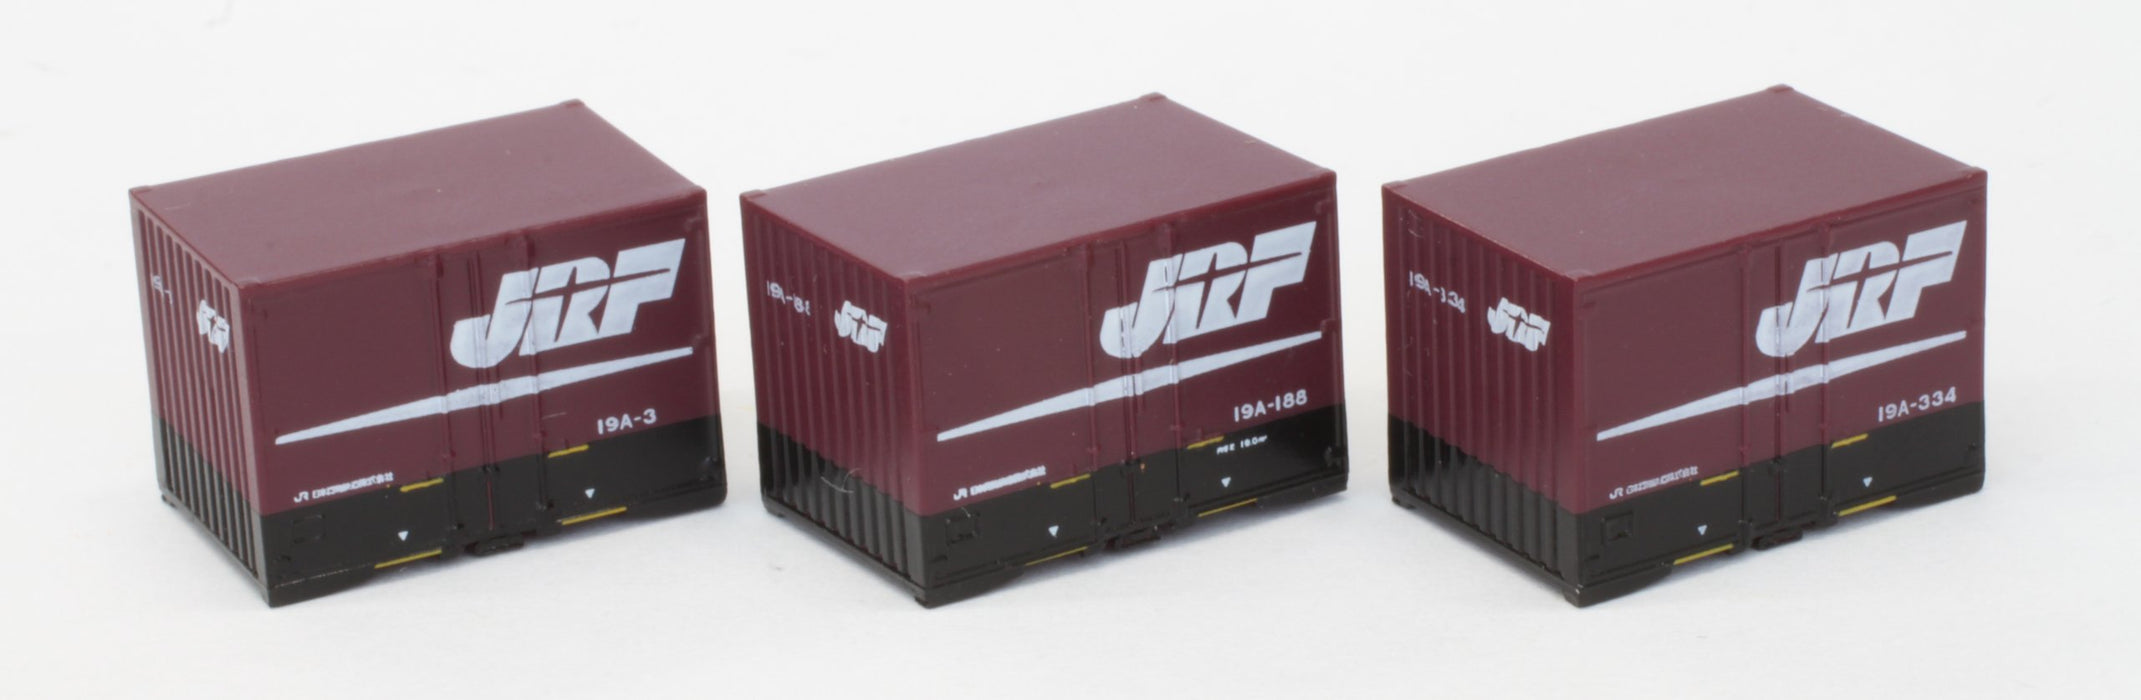 Rokuhan Z Gauge 19A Type Jr Freight Container Set - 3 Pieces